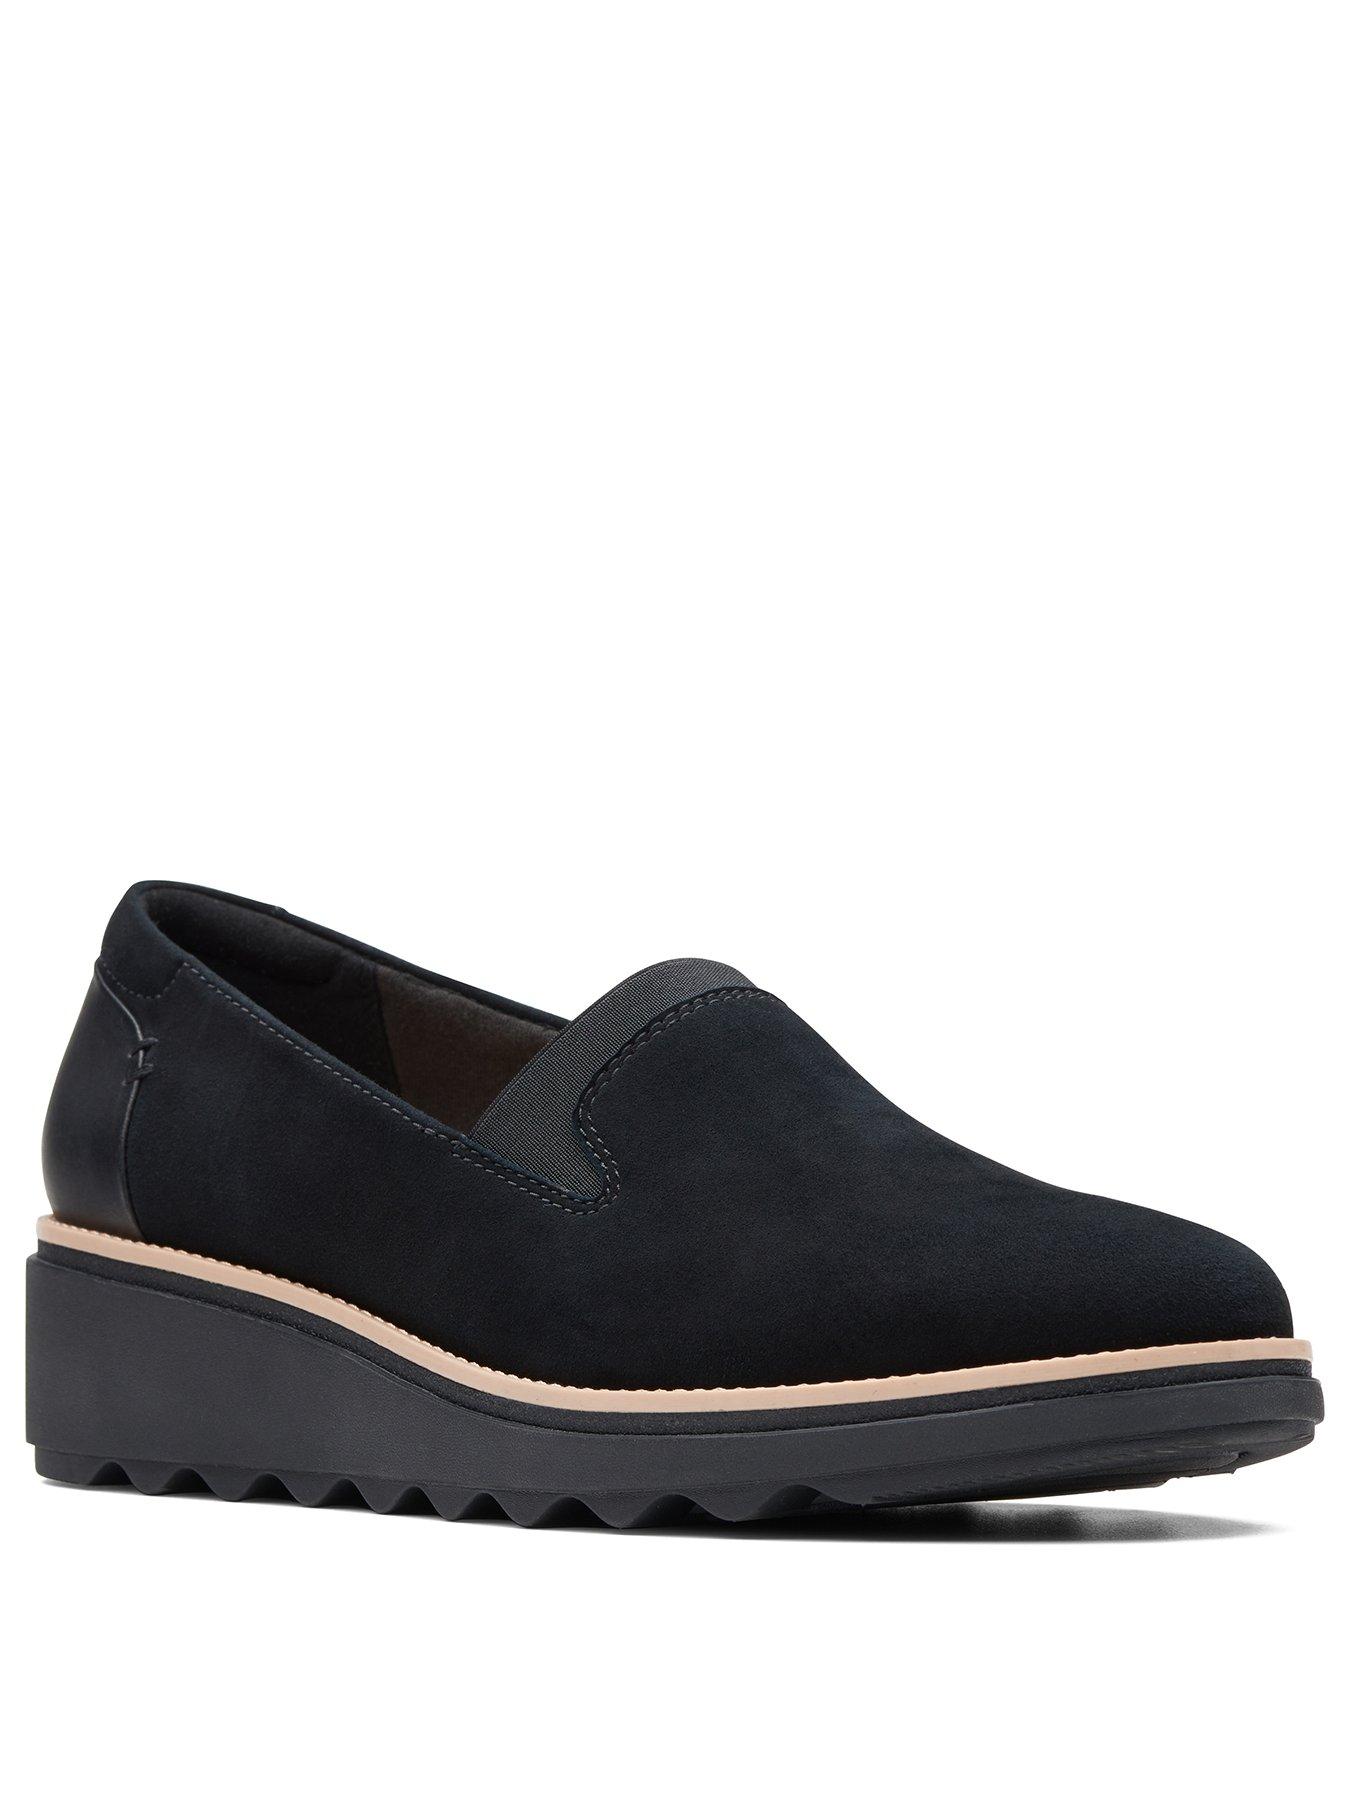 Clarks Sharon Dolly Slip On Wedge Suede Shoe - Black | very.co.uk